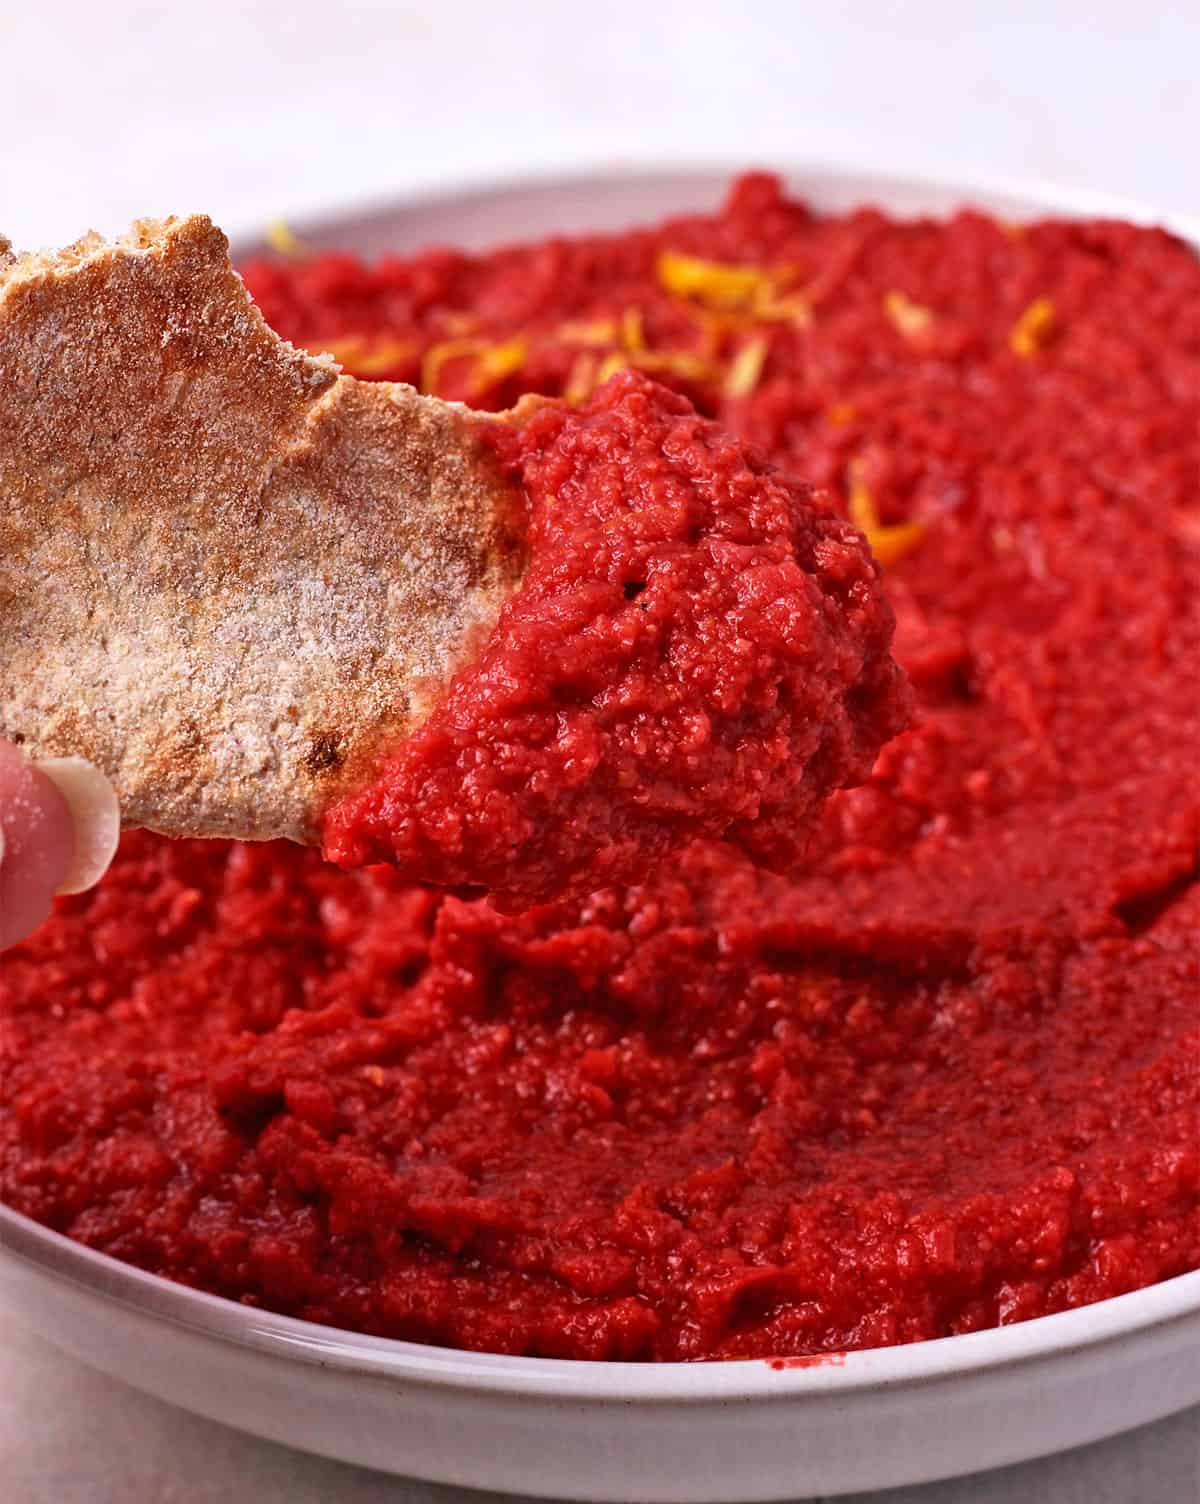 Pita bread is dipped into a bowl of beet hummus.